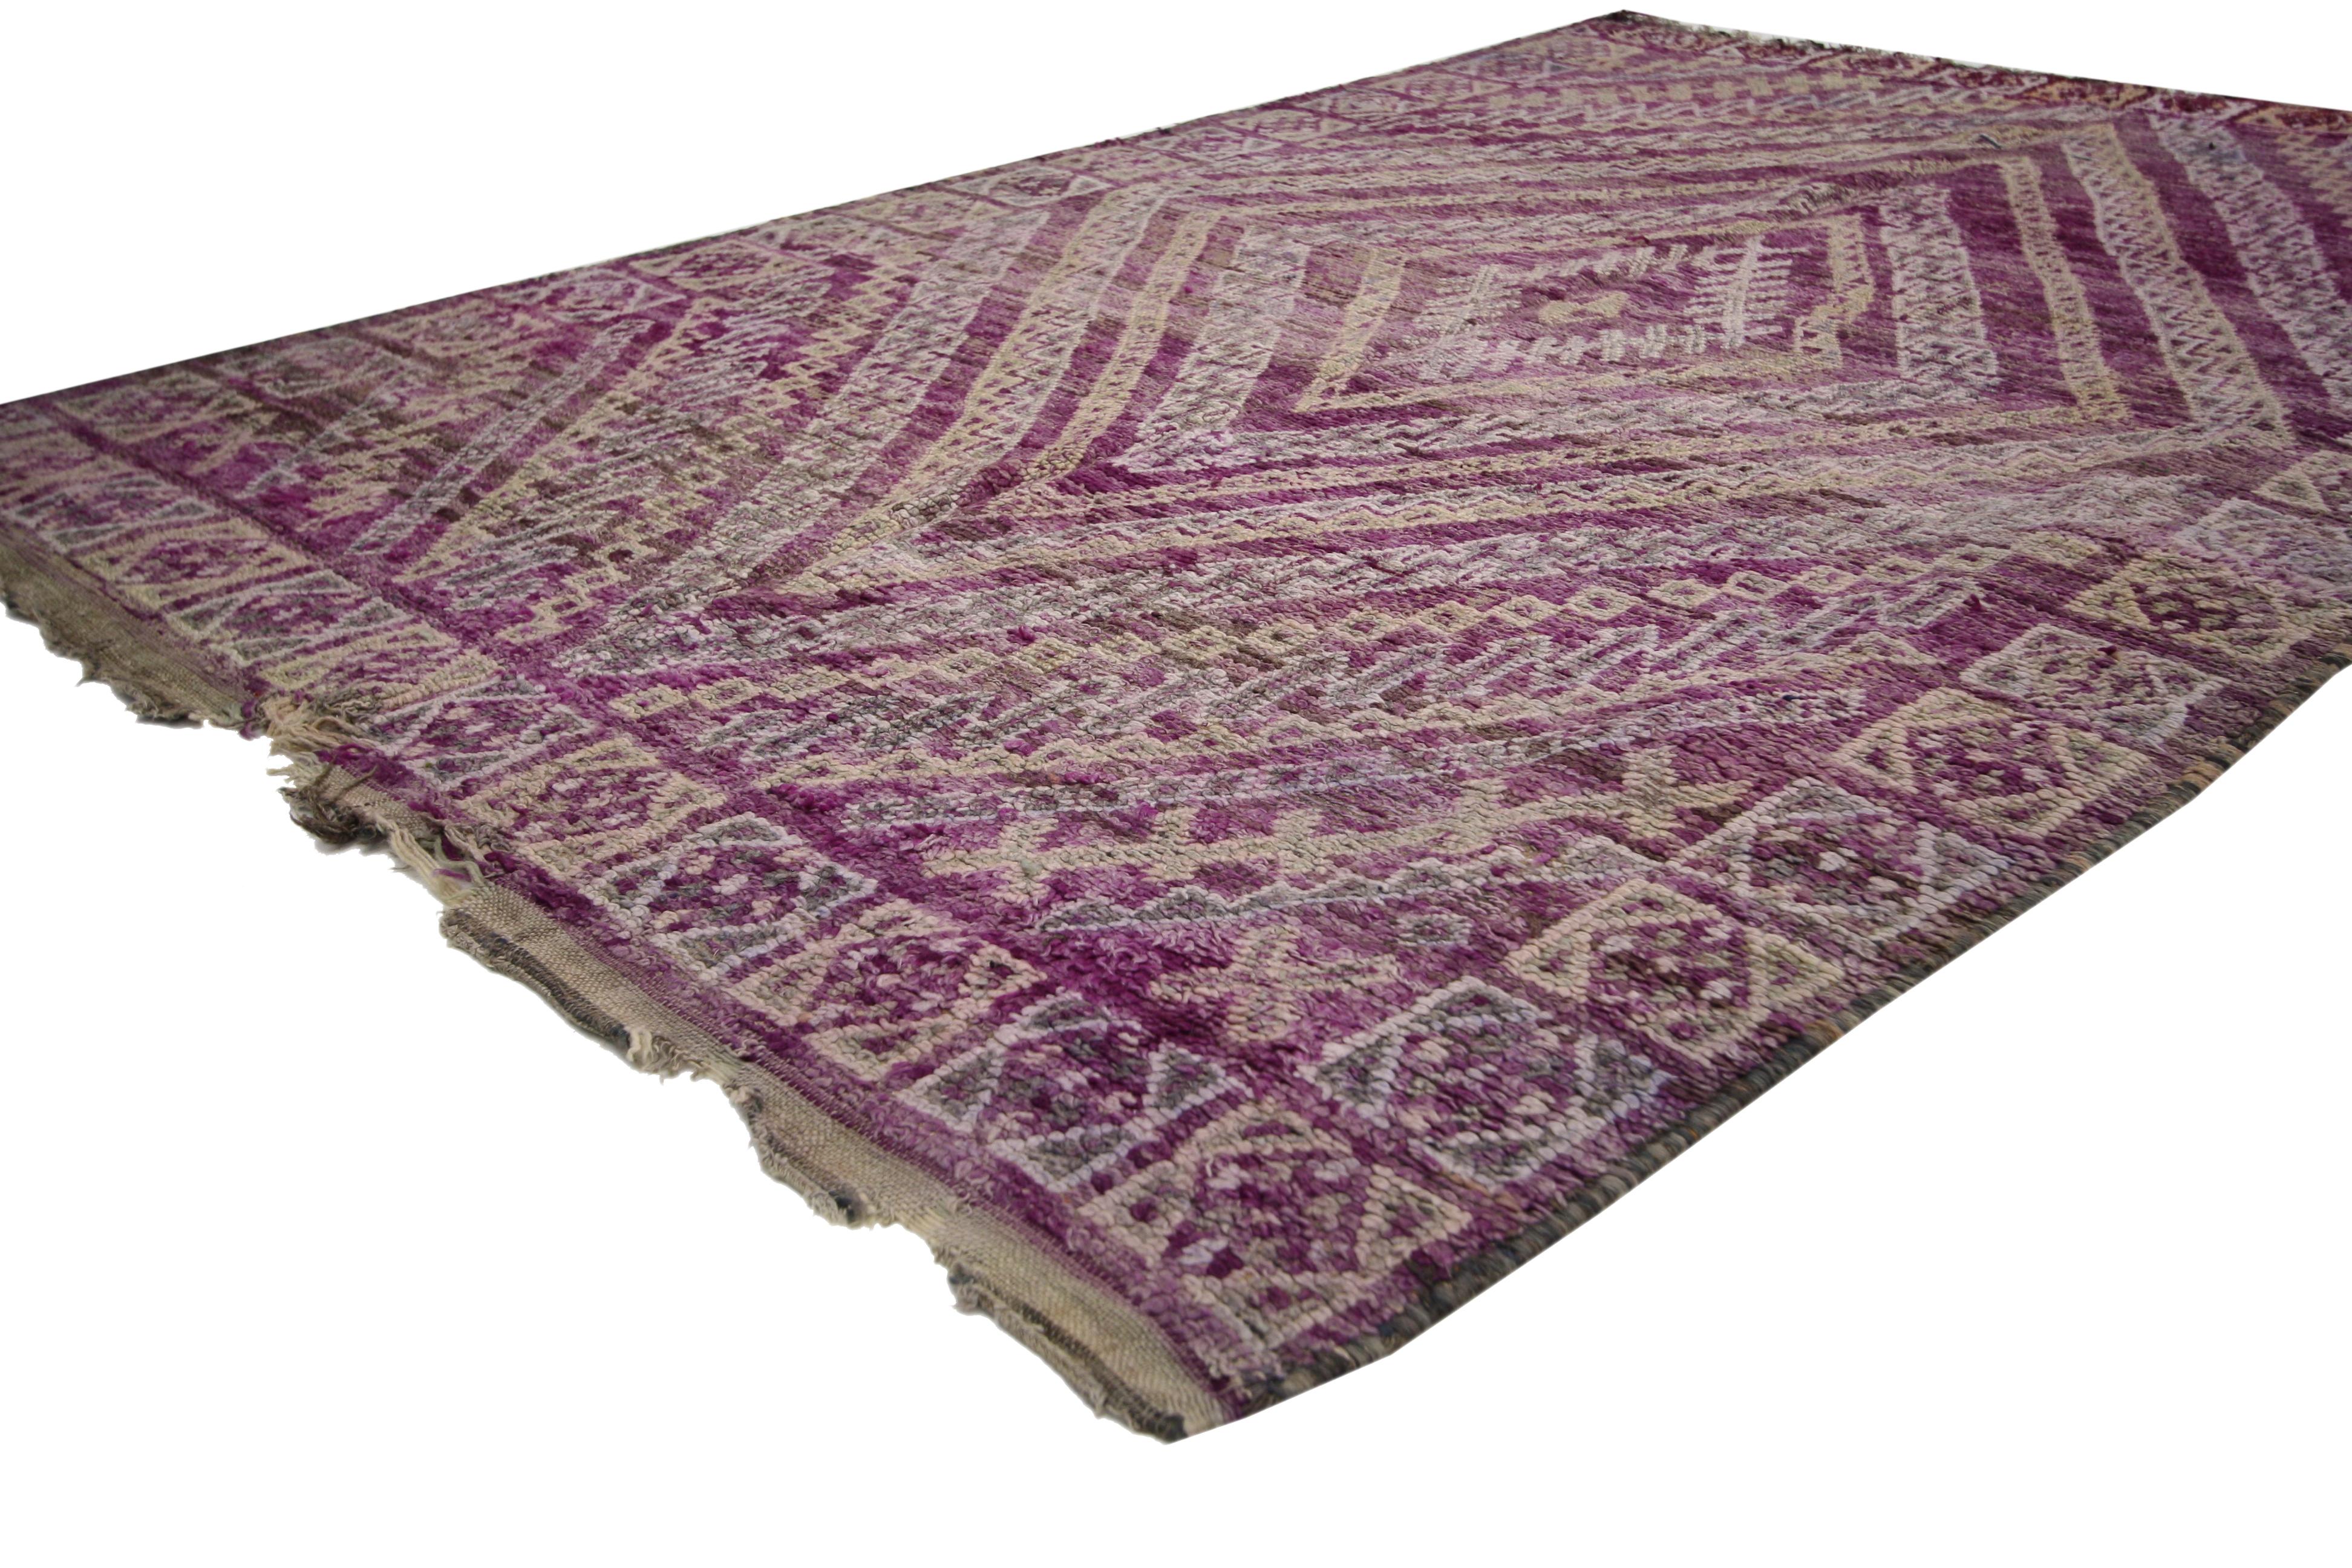 20715 Vintage Purple Beni M'Guild Moroccan Rug with Memphis Design Postmodern Bohemian Style 05'07 x 07'10. This hand-knotted wool vintage purple Beni M'Guild Moroccan rug with Tribal Style features a series of expanded diamonds composed from